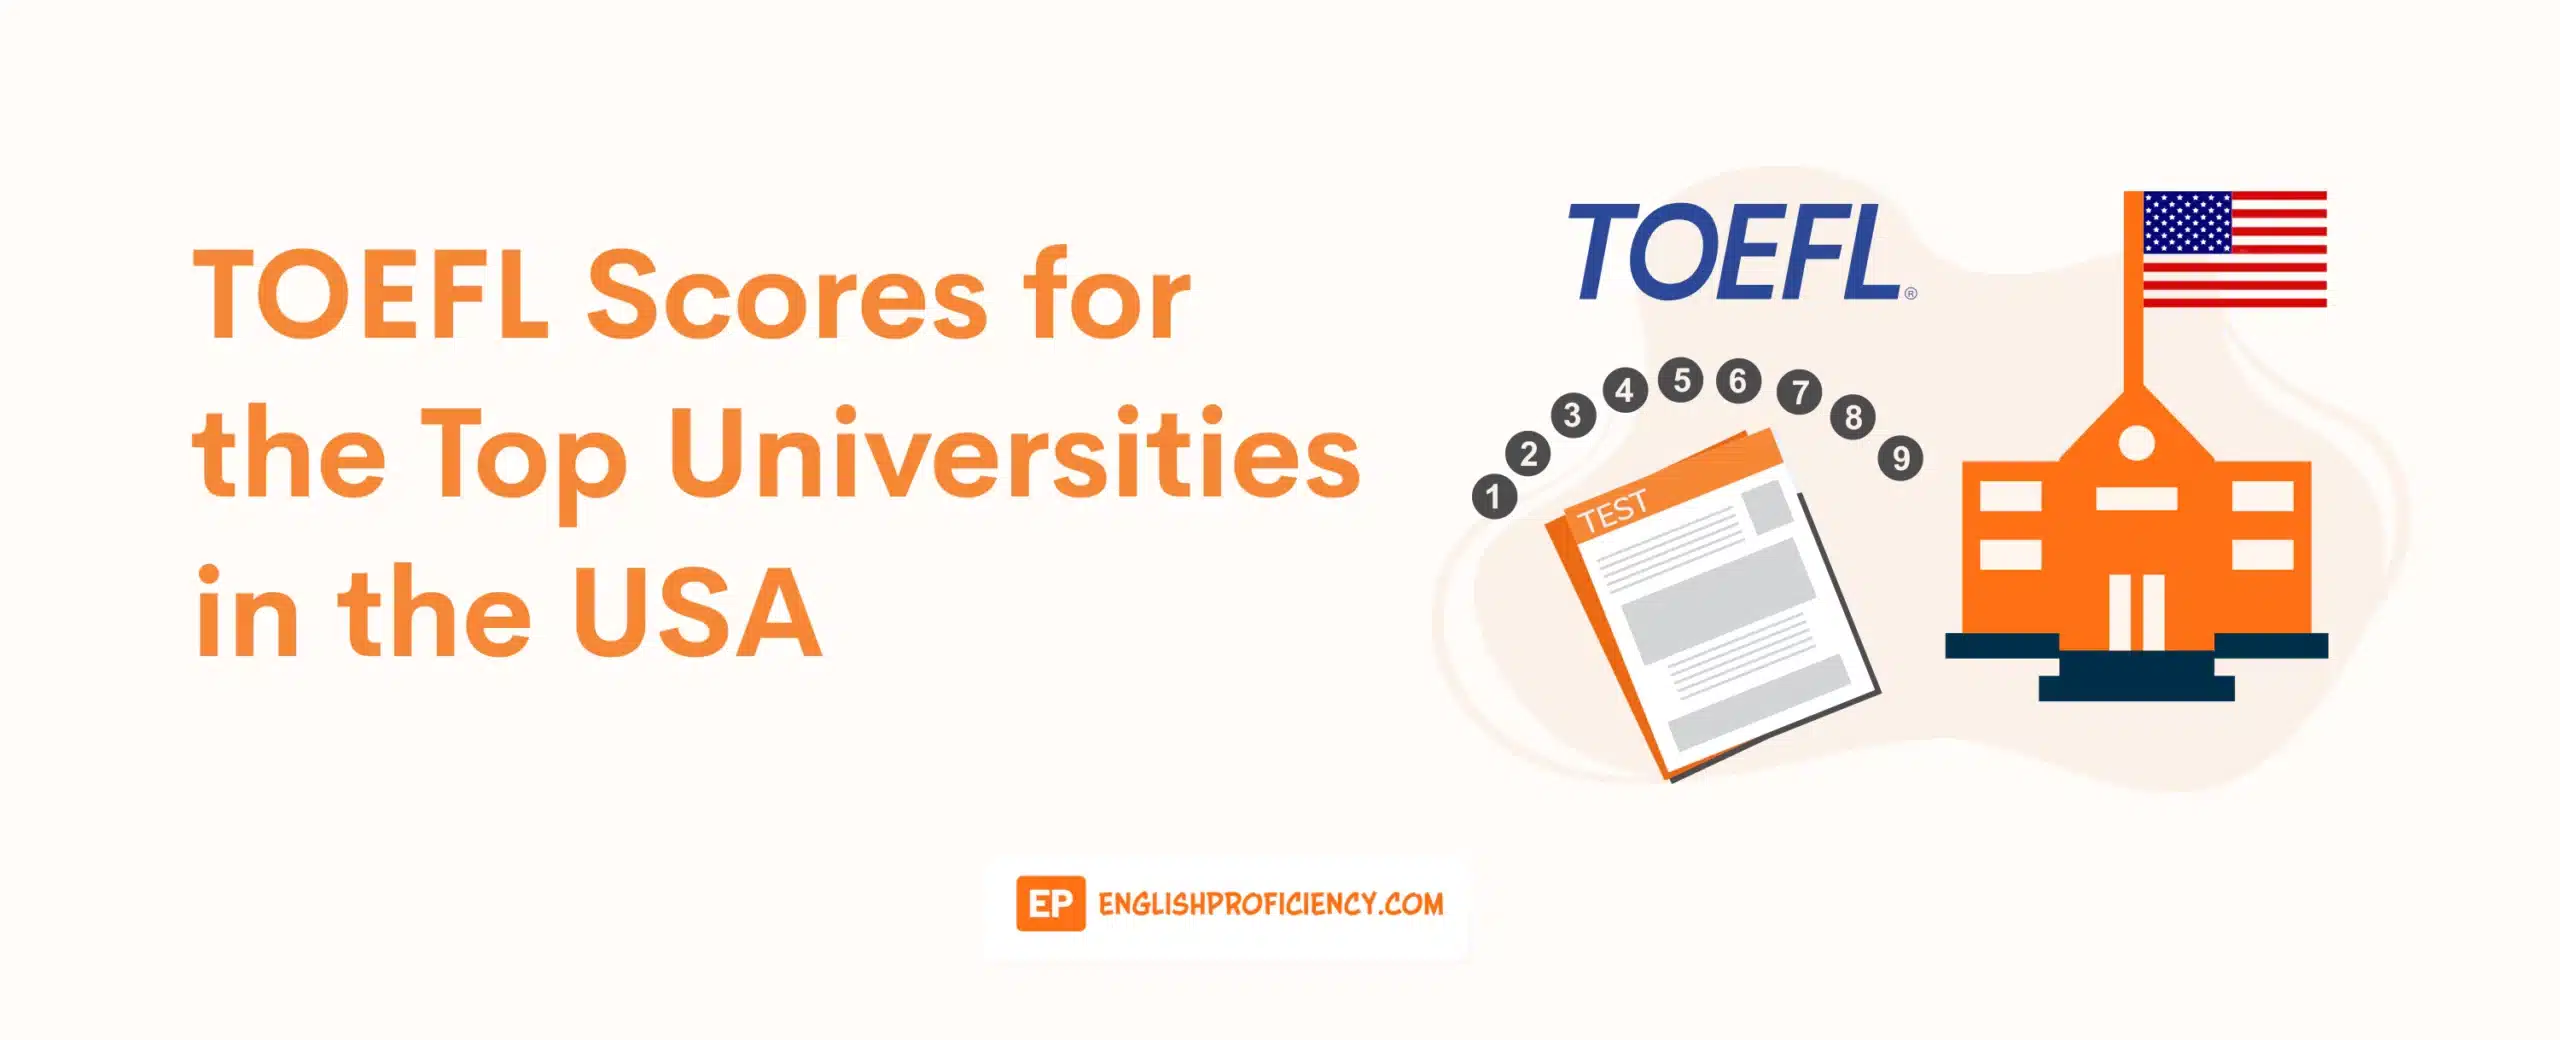 TOEFL Scores for the Top Universities in the USA